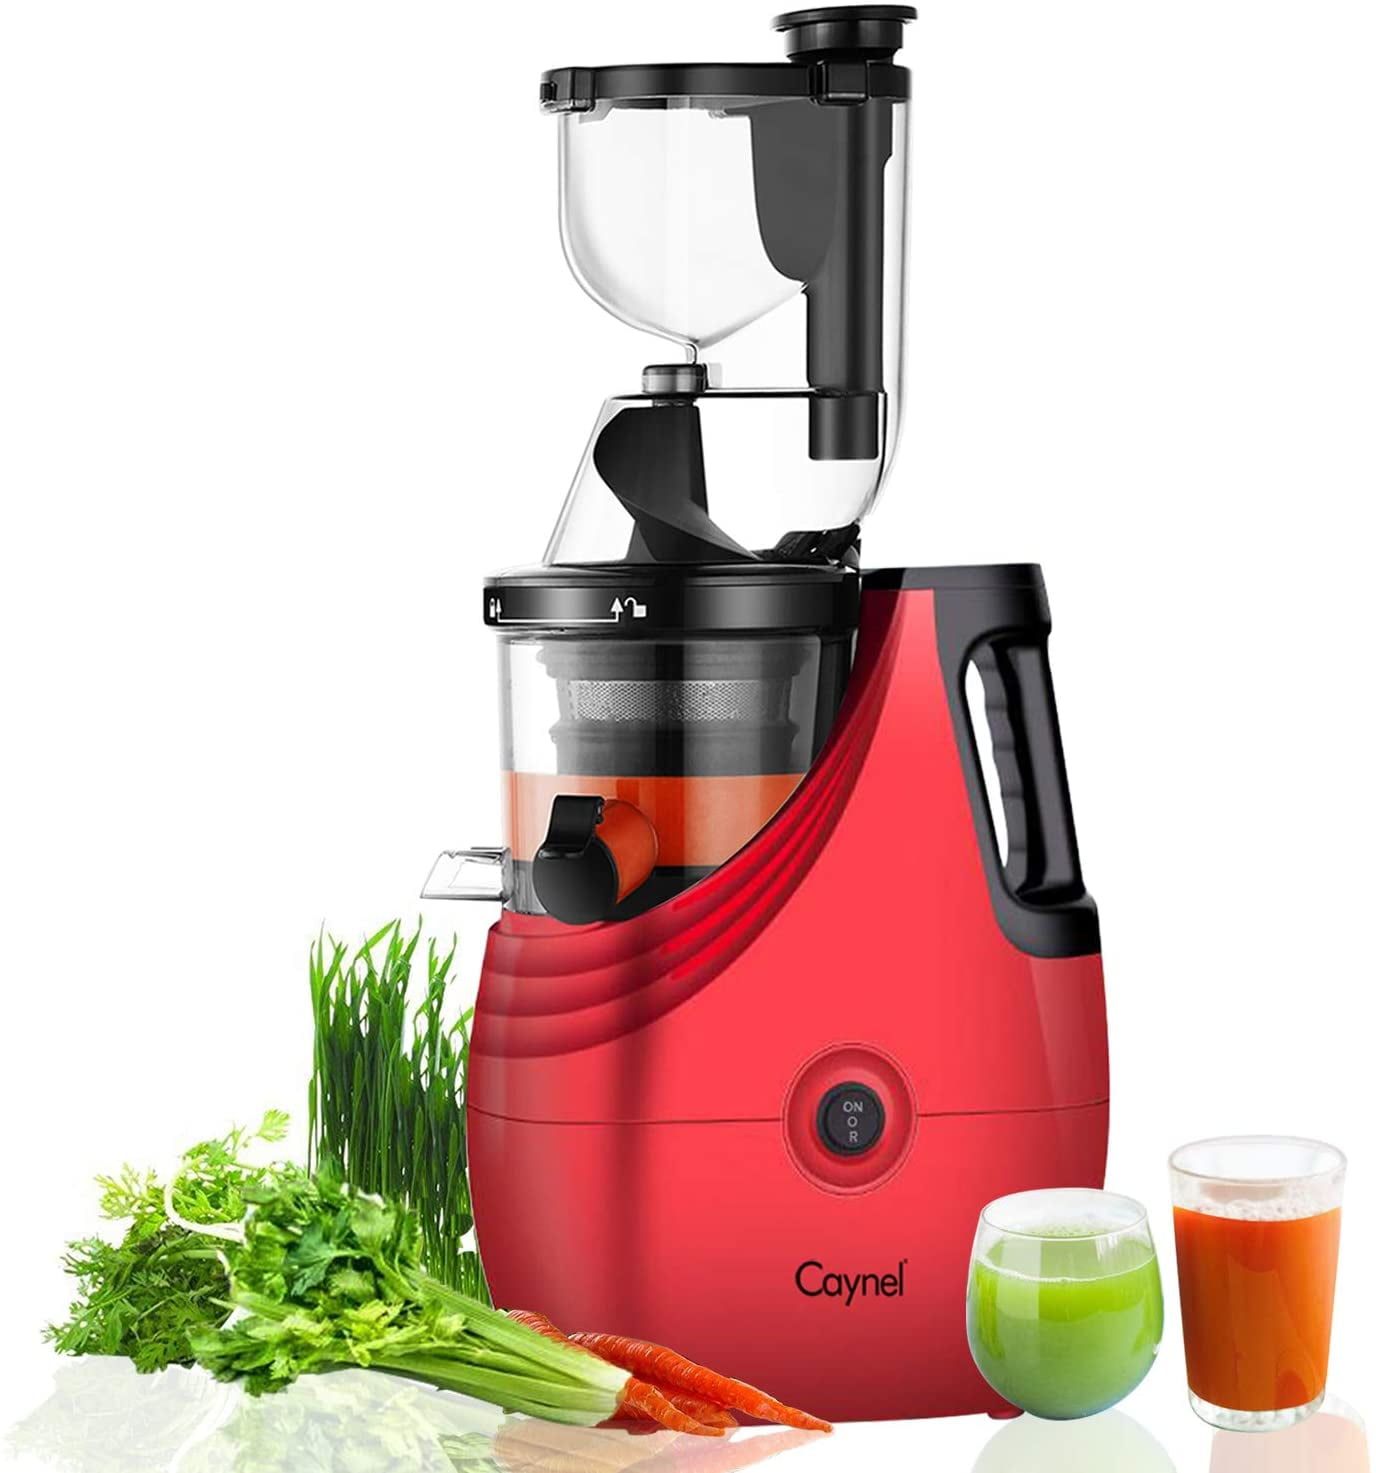 Silver 150-Watts West Bend Juicer Cold Press Masticating Extractor Machine Features Quiet Motor Anti-Clog Reverse Function Nutrient Preserving For Juicing Fruits Vegetables and All Greens